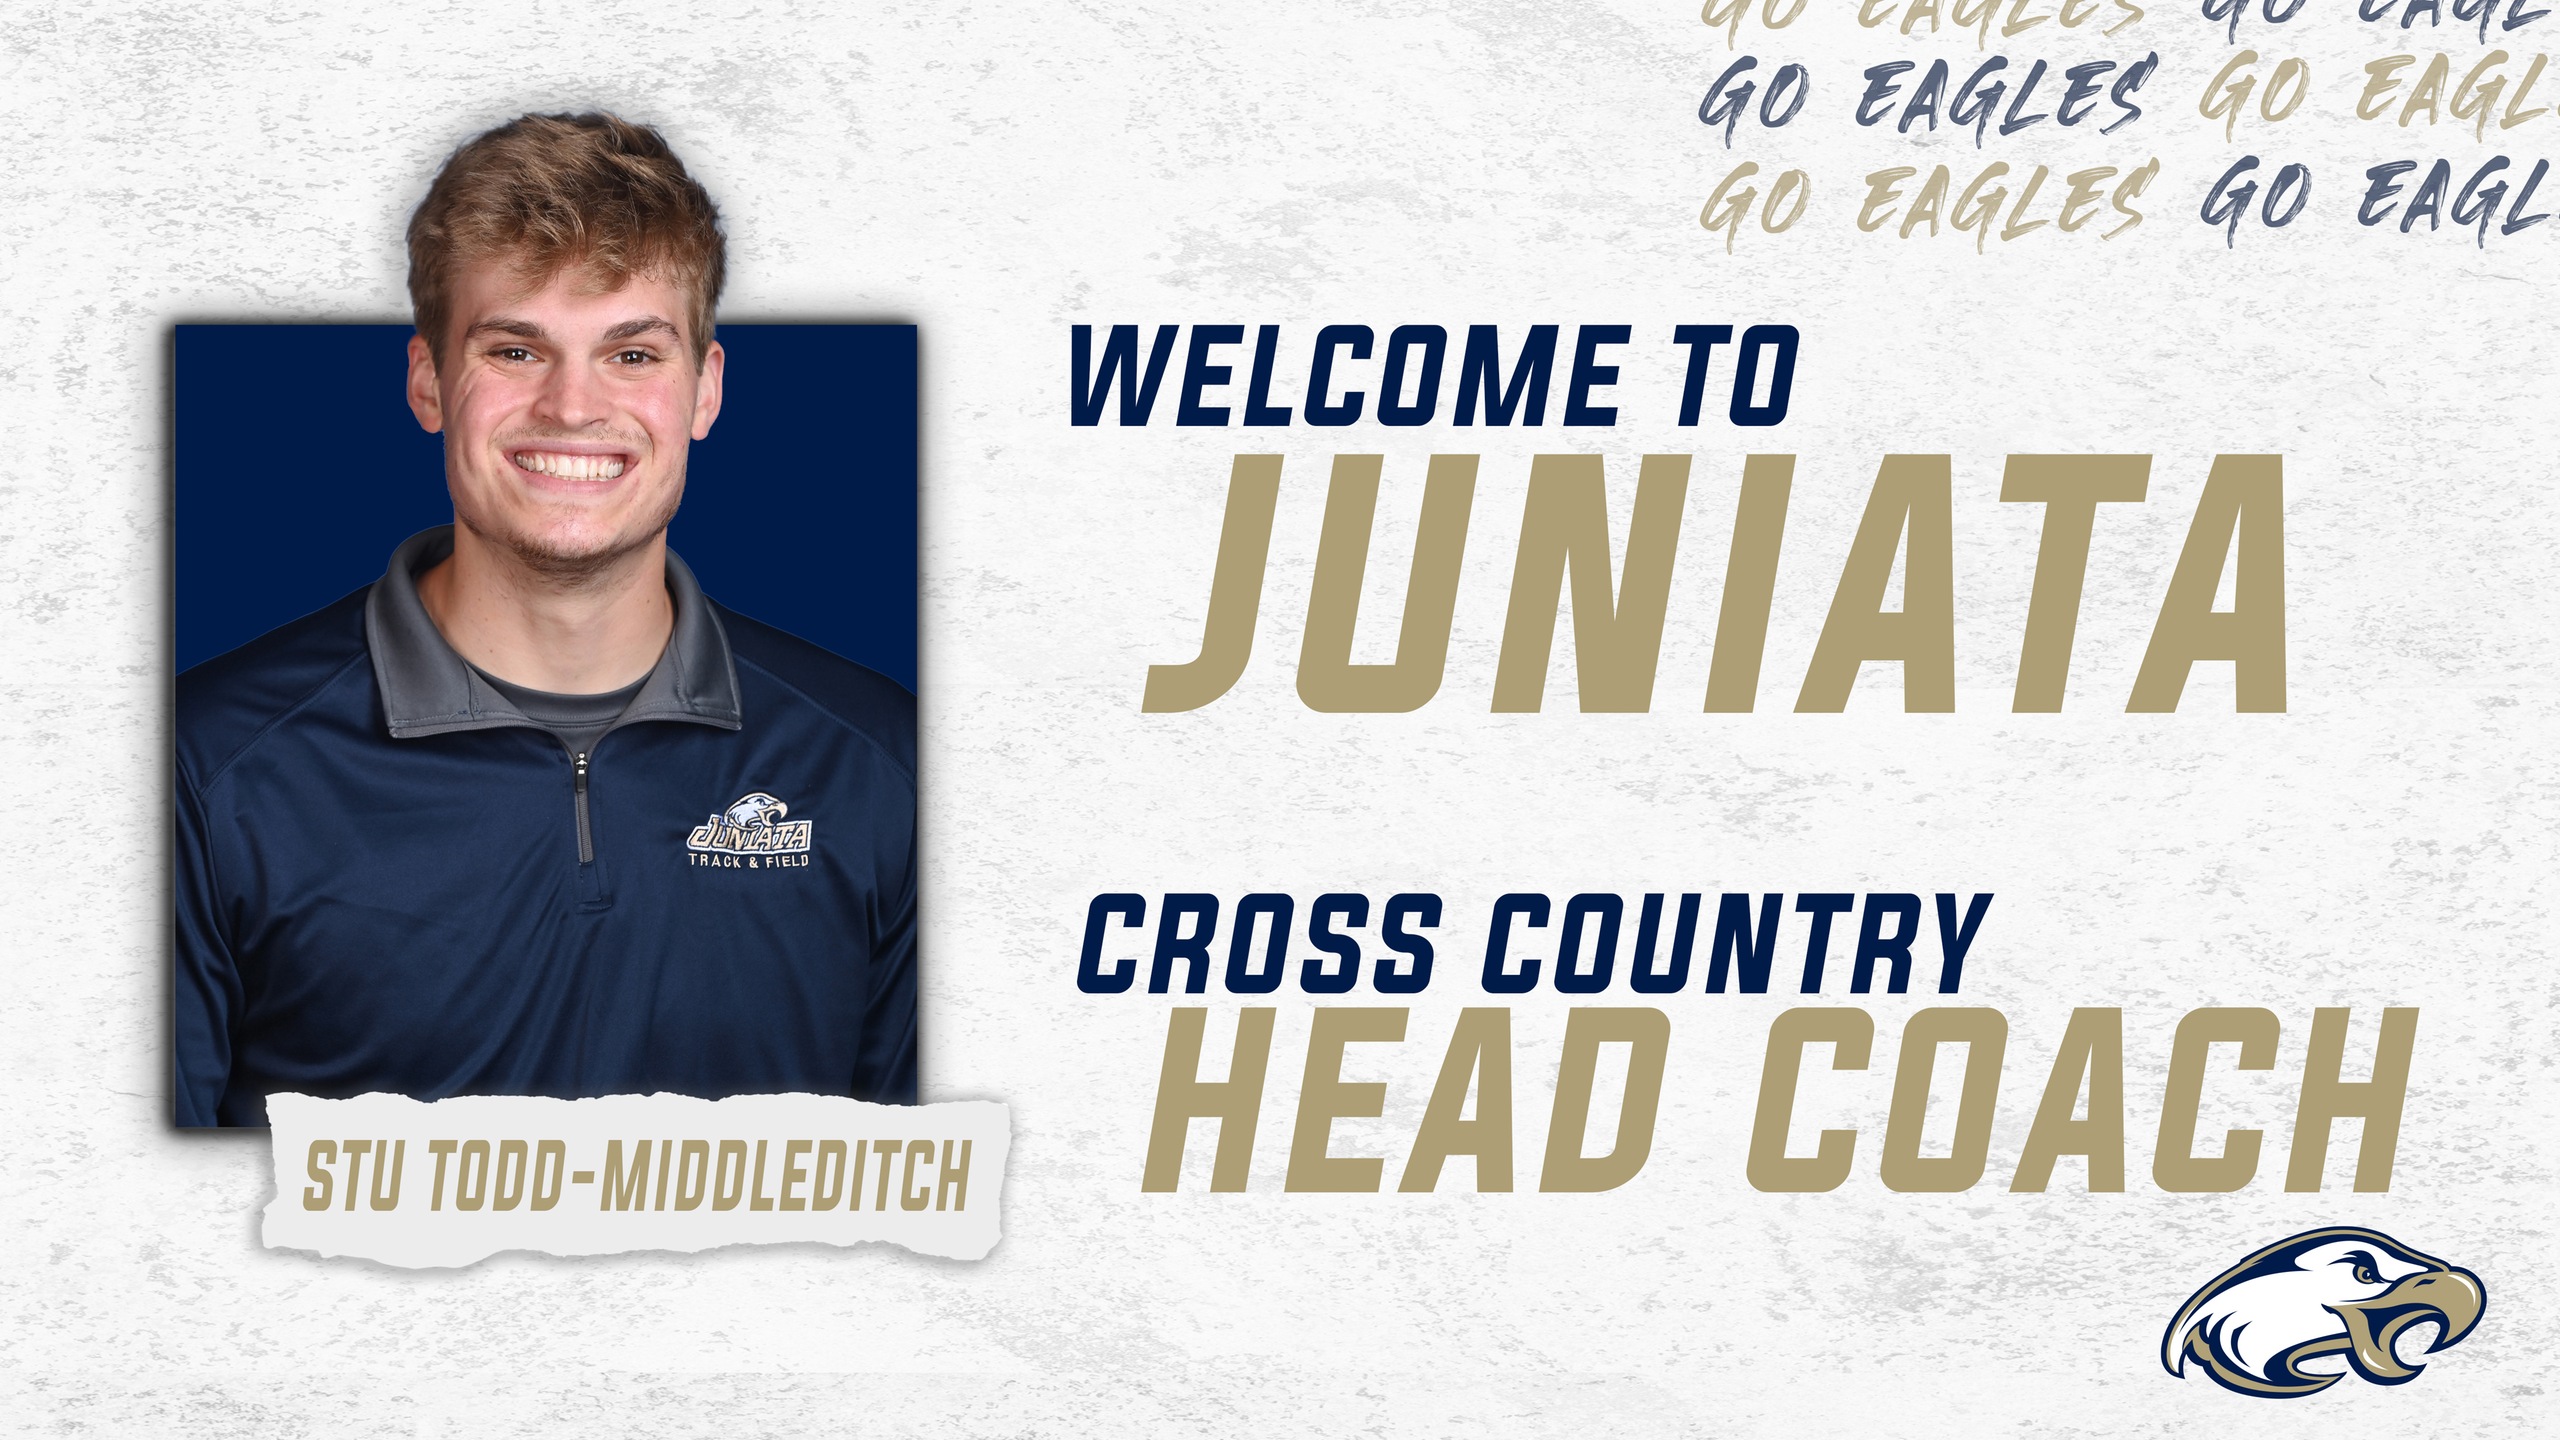 Todd-Middleditch Promoted to Lead Juniata Cross Country Programs